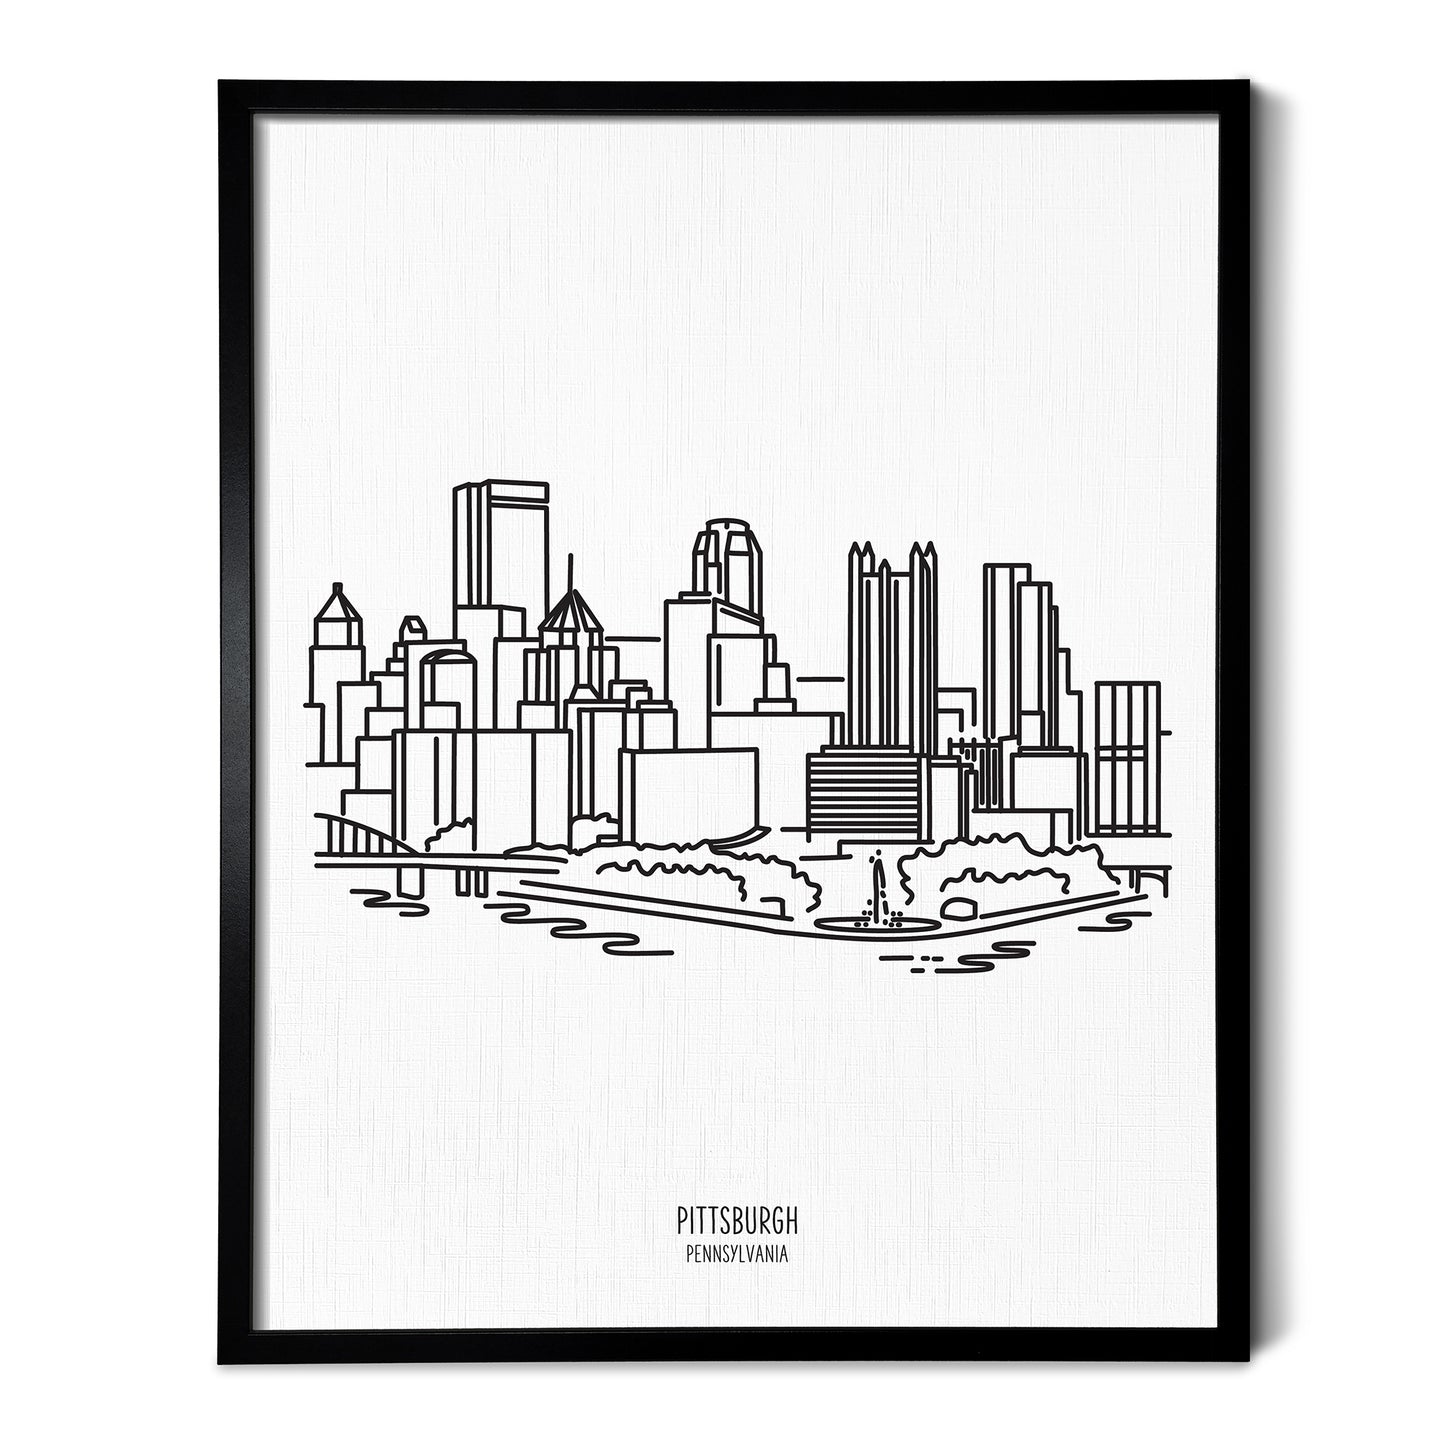 A line art drawing of the Pittsburgh Pennsylvania Skyline on white linen paper in a thin black picture frame